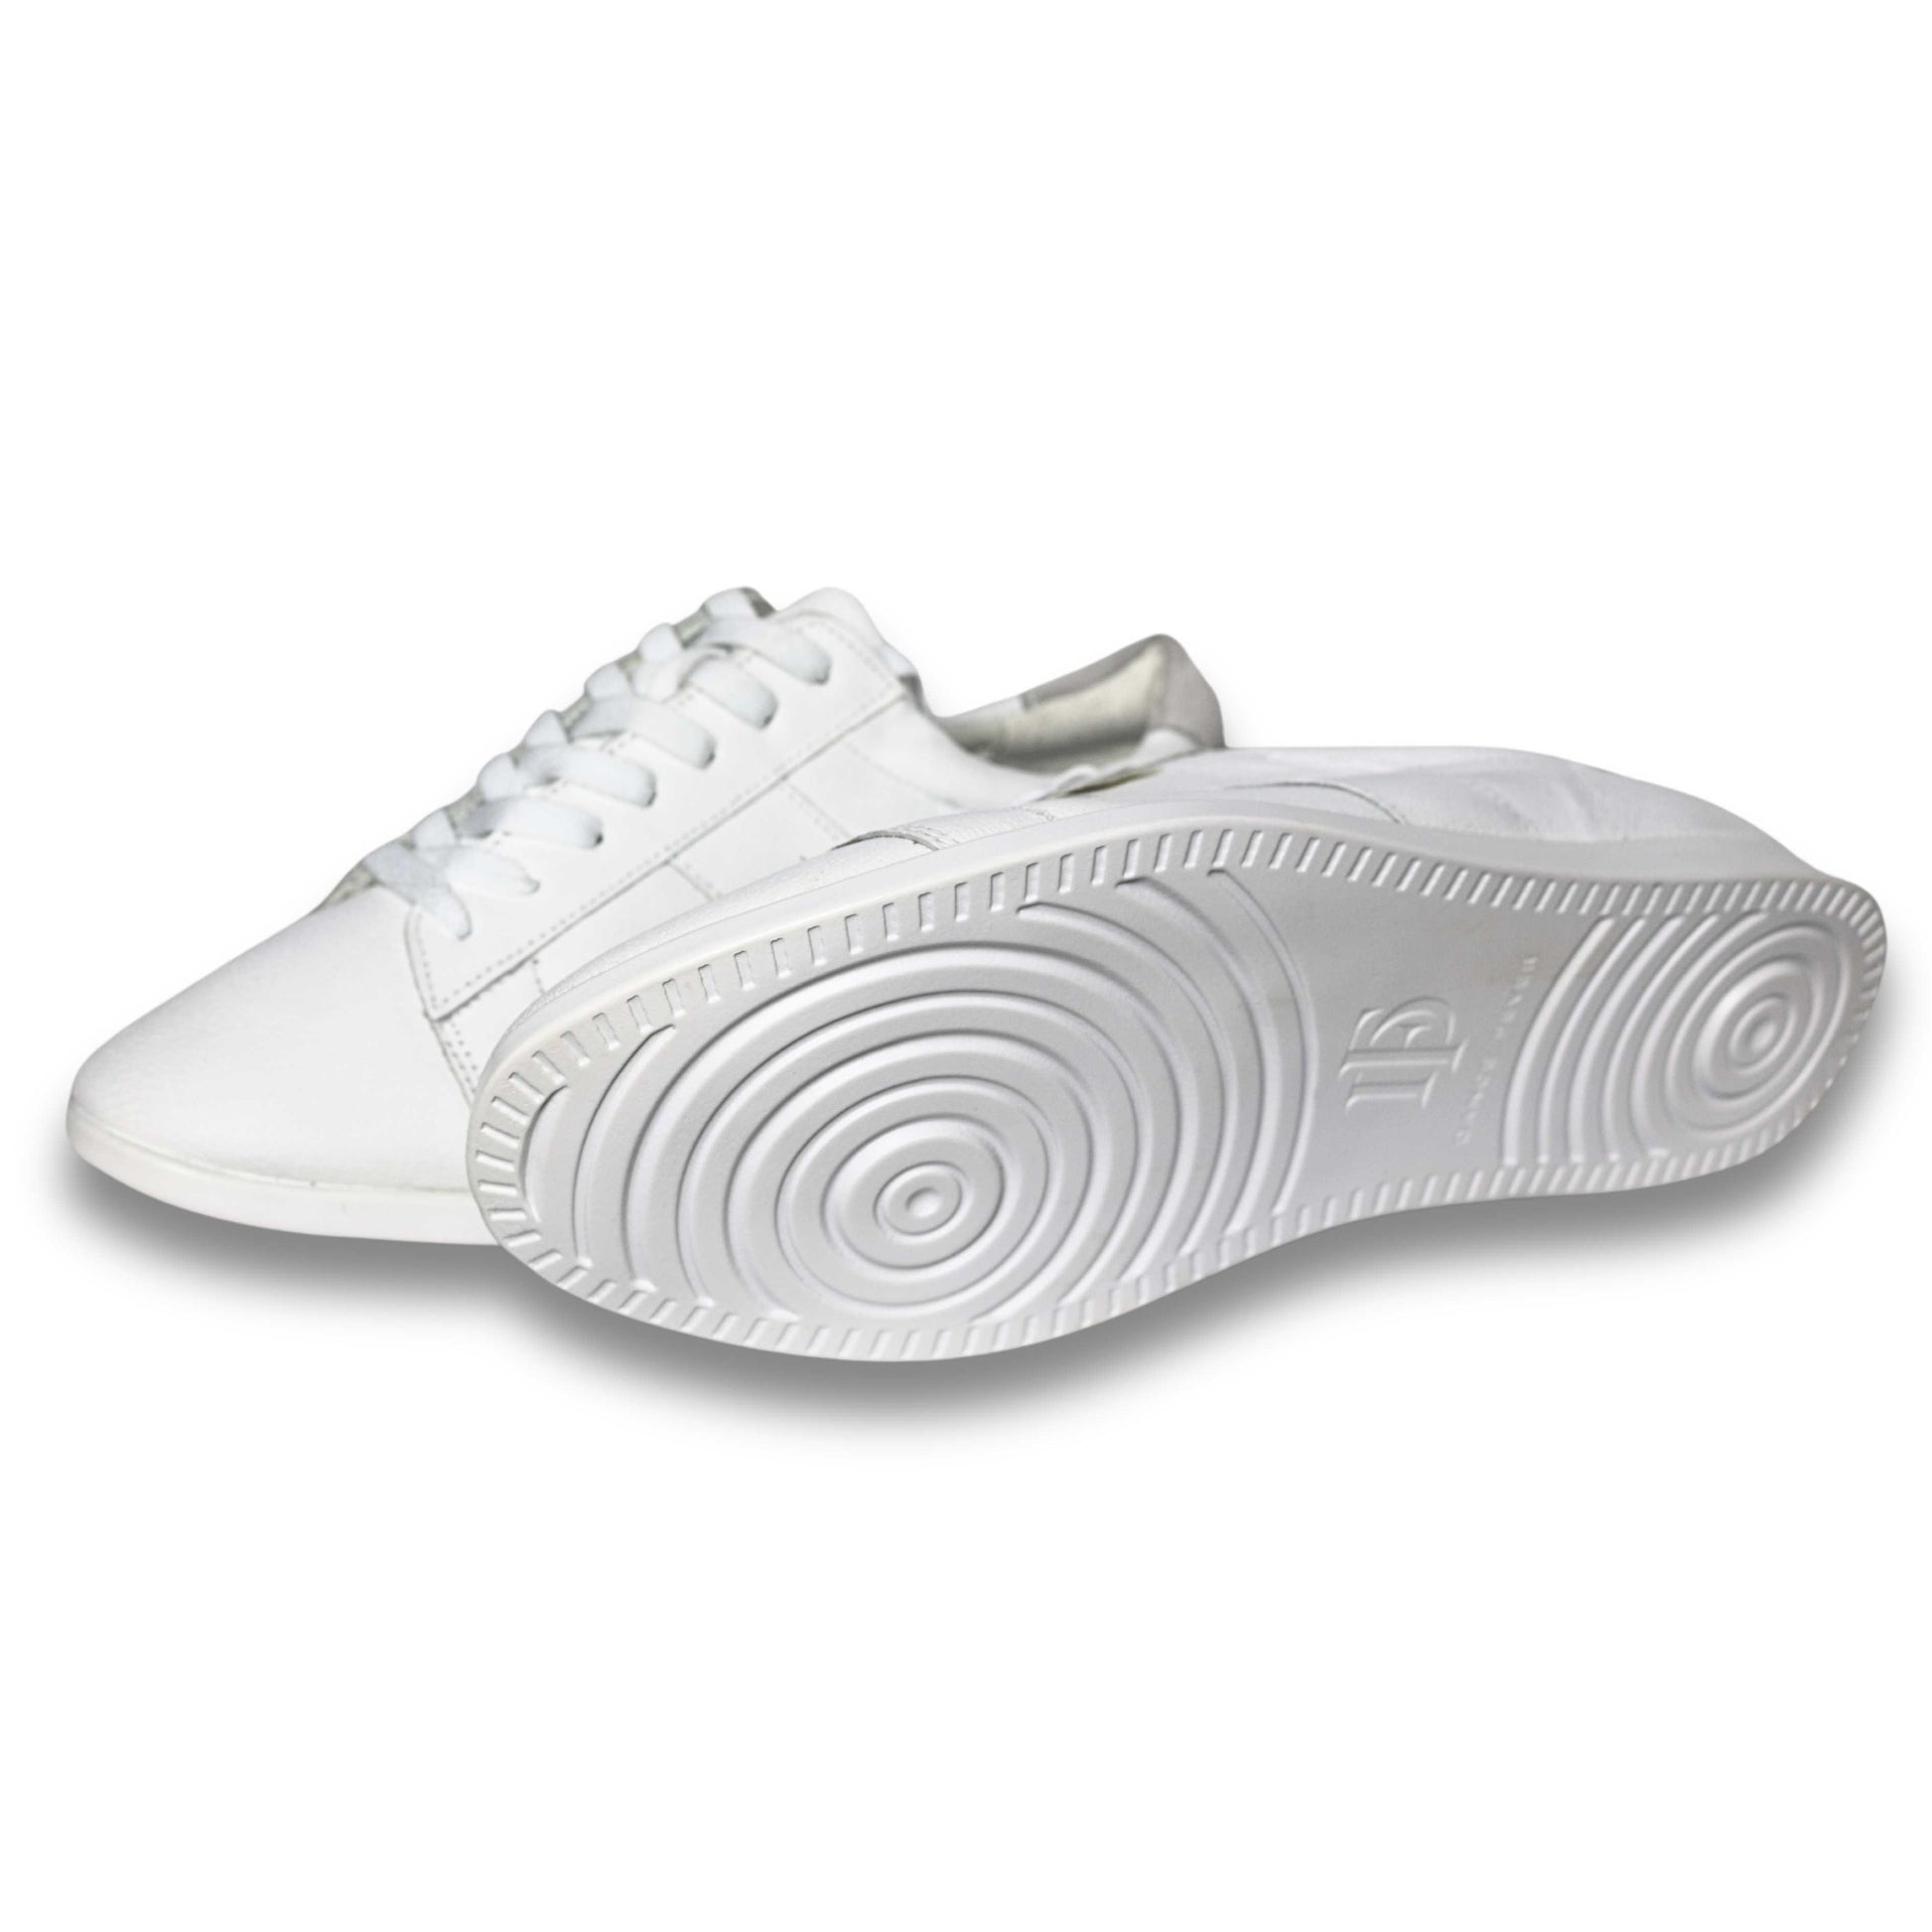 Men's White Leather Dance Sneakers with Dual Pivot Point, Spin Spots & Flexible, Smooth Sole - (2305W) - Rockabilly Australia Pty Ltd